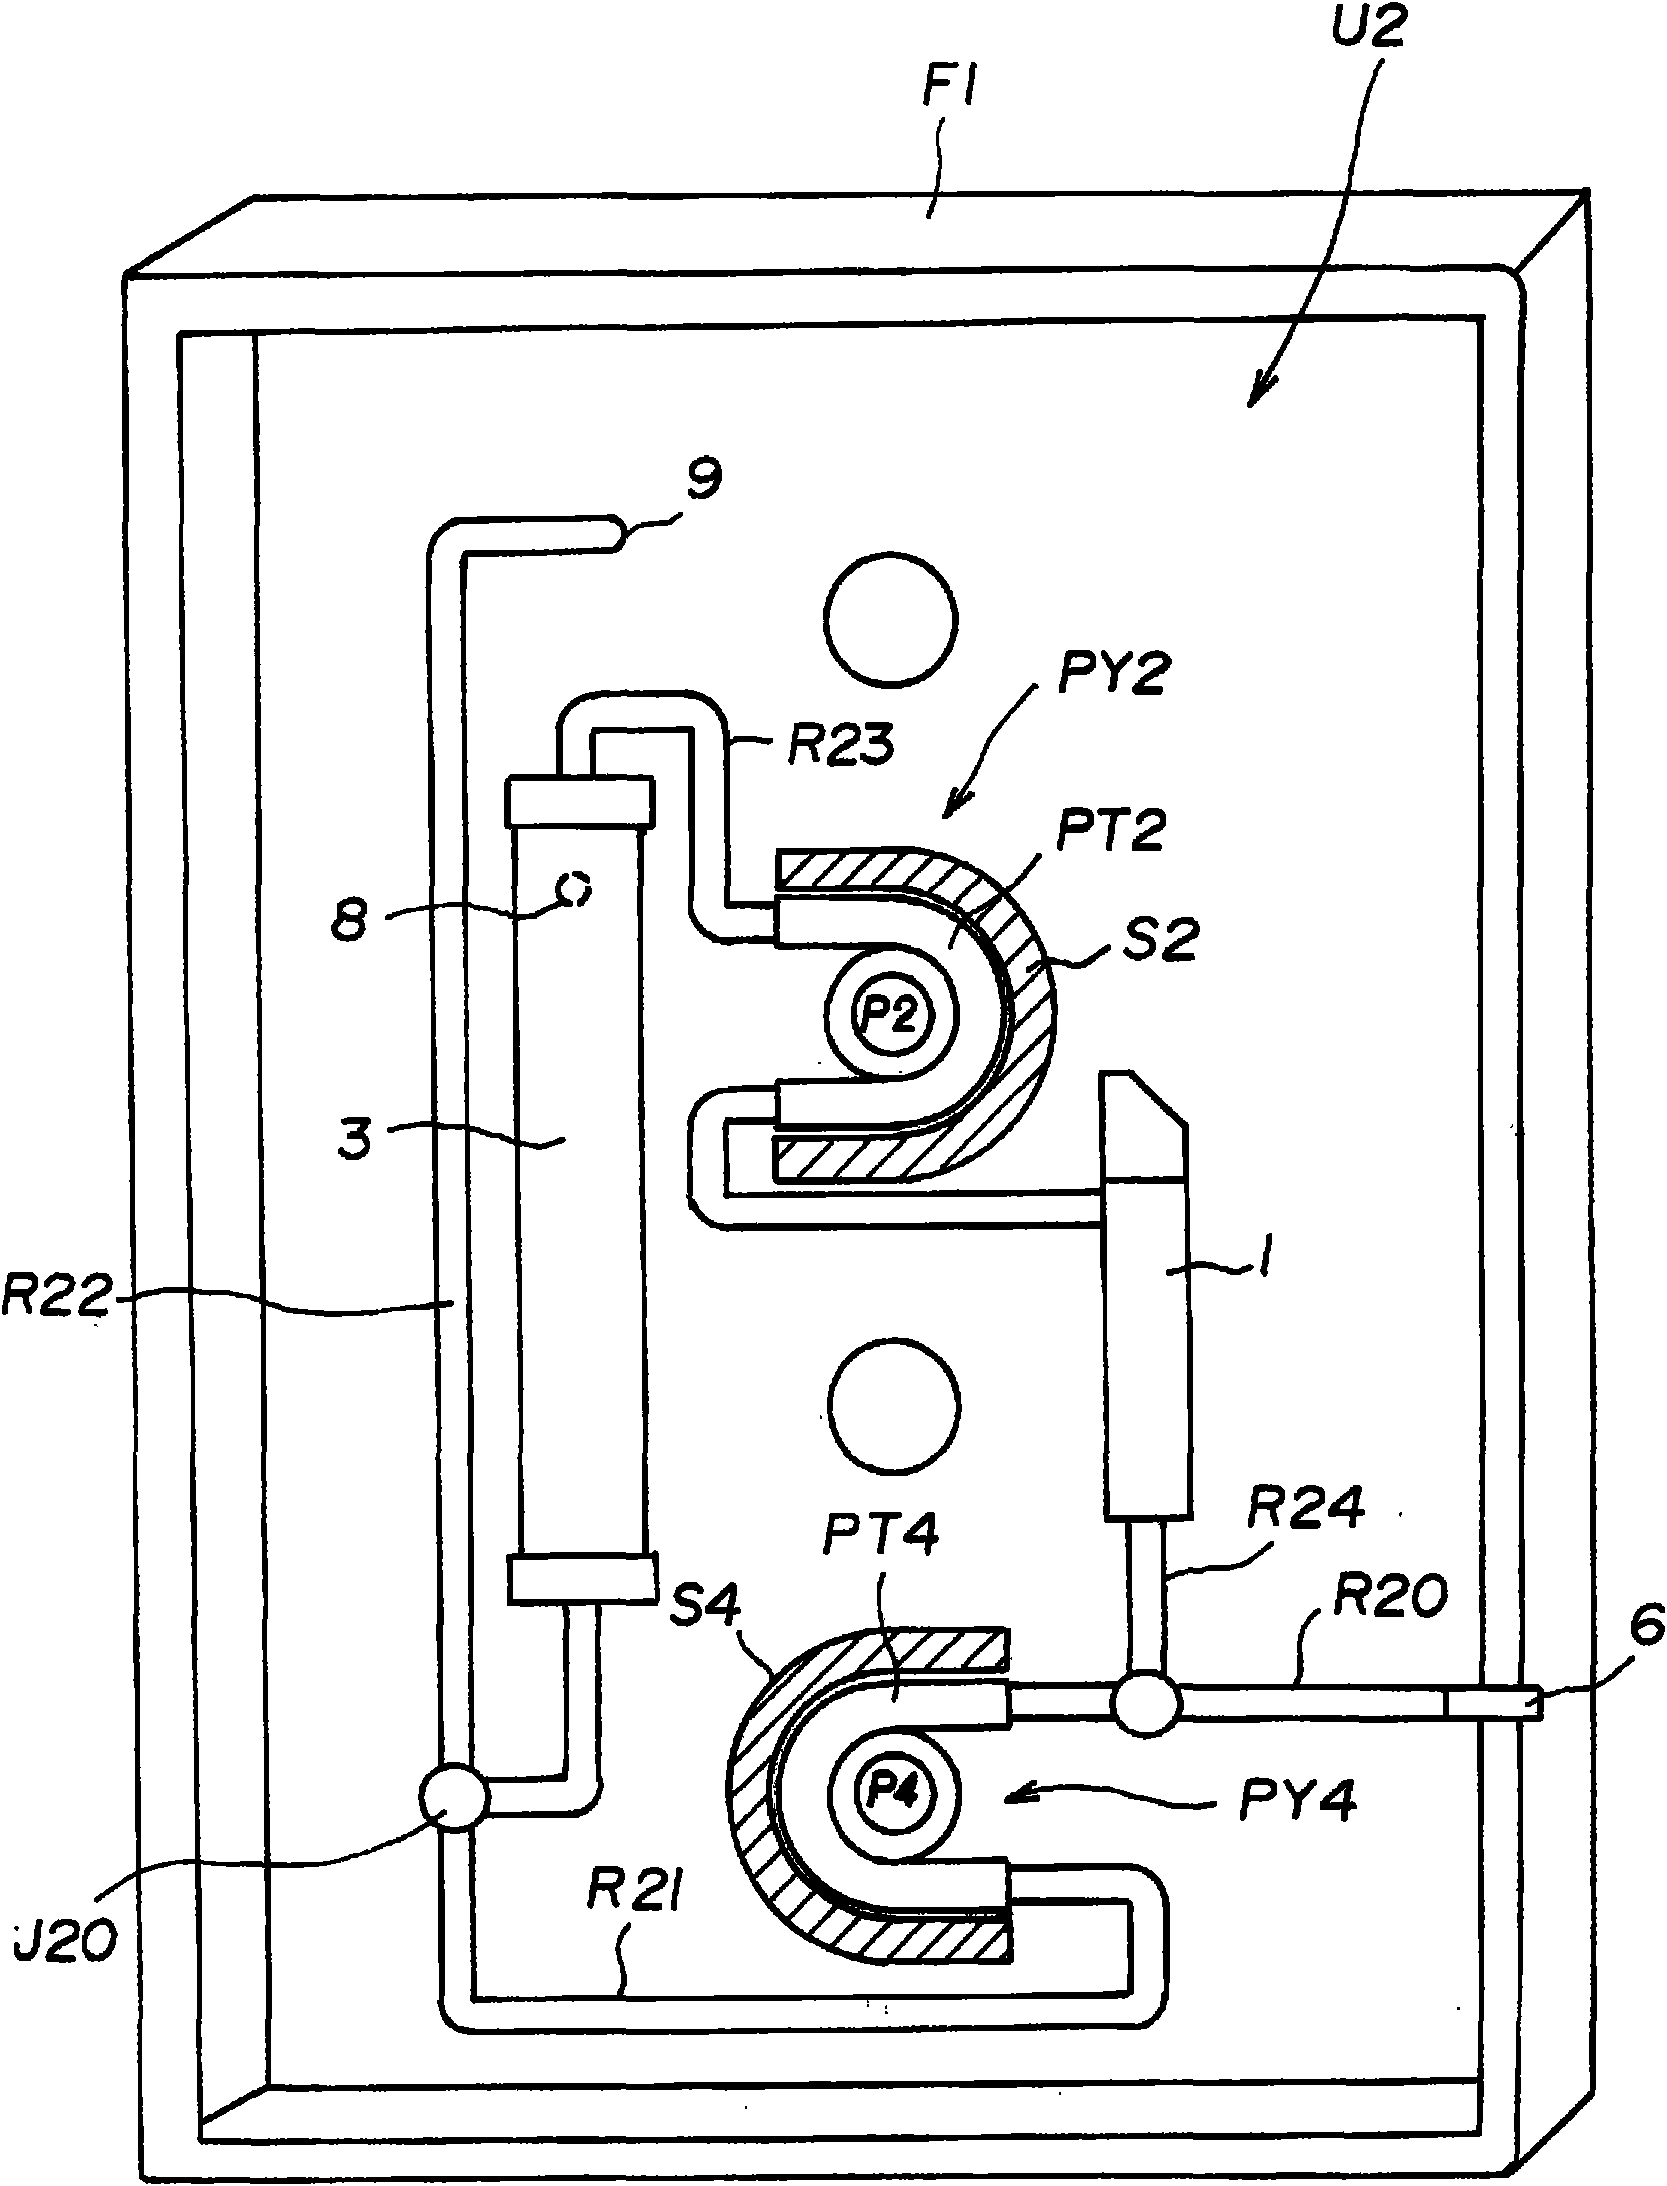 Method of forming body fluid purification cassette